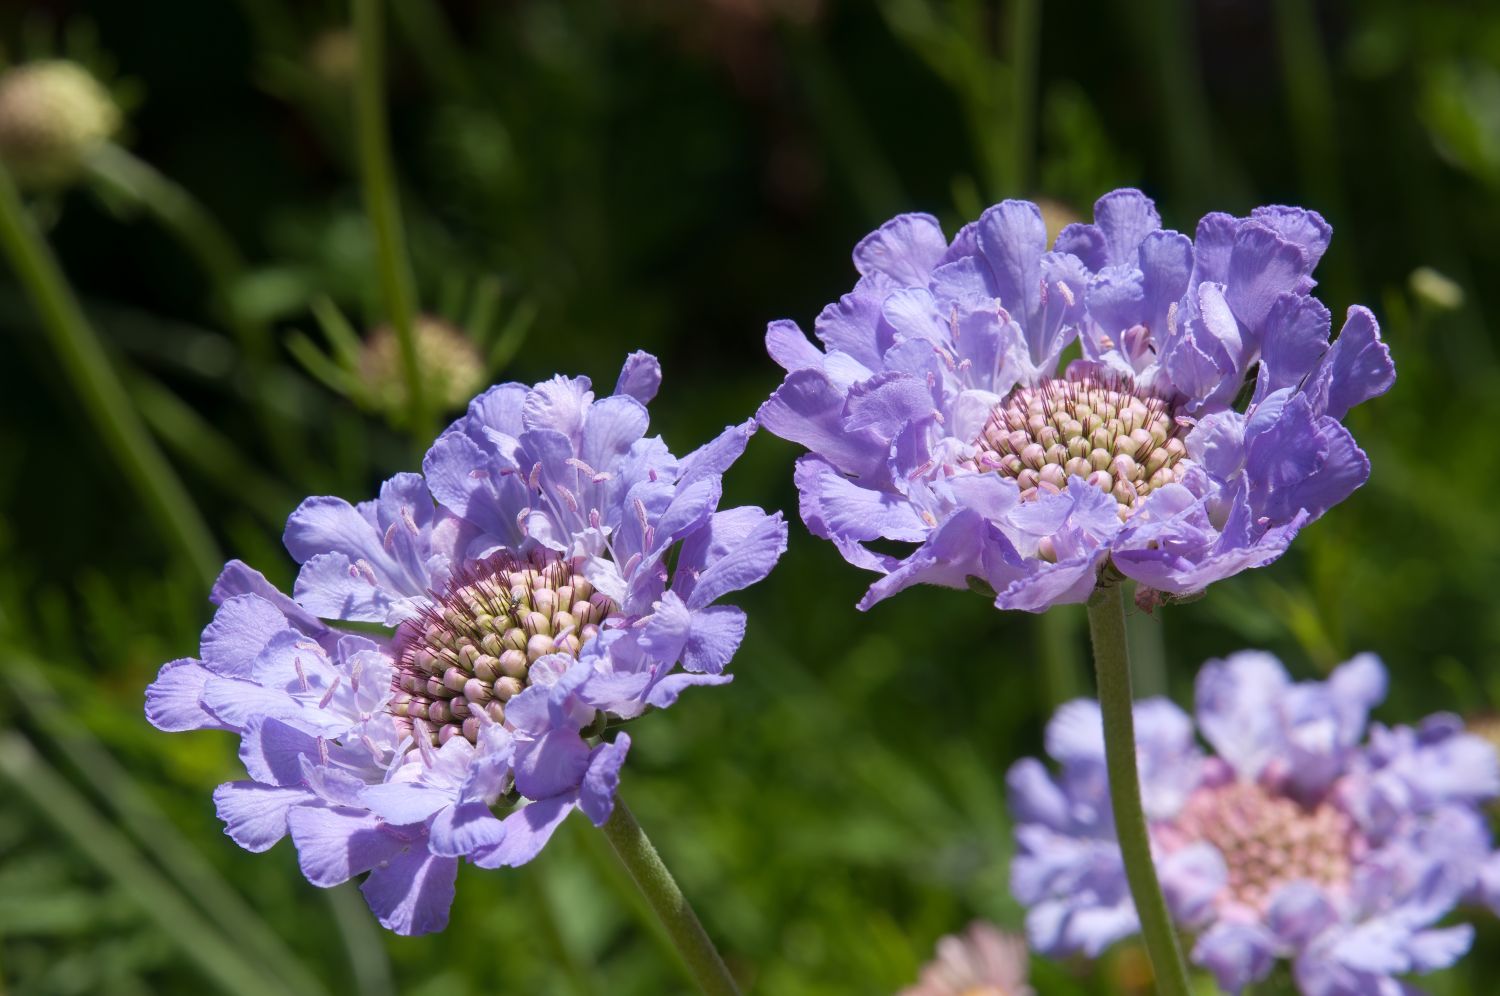 Growing and Caring for Scabiosa: Tips for Pincushion Flower Enthusiasts